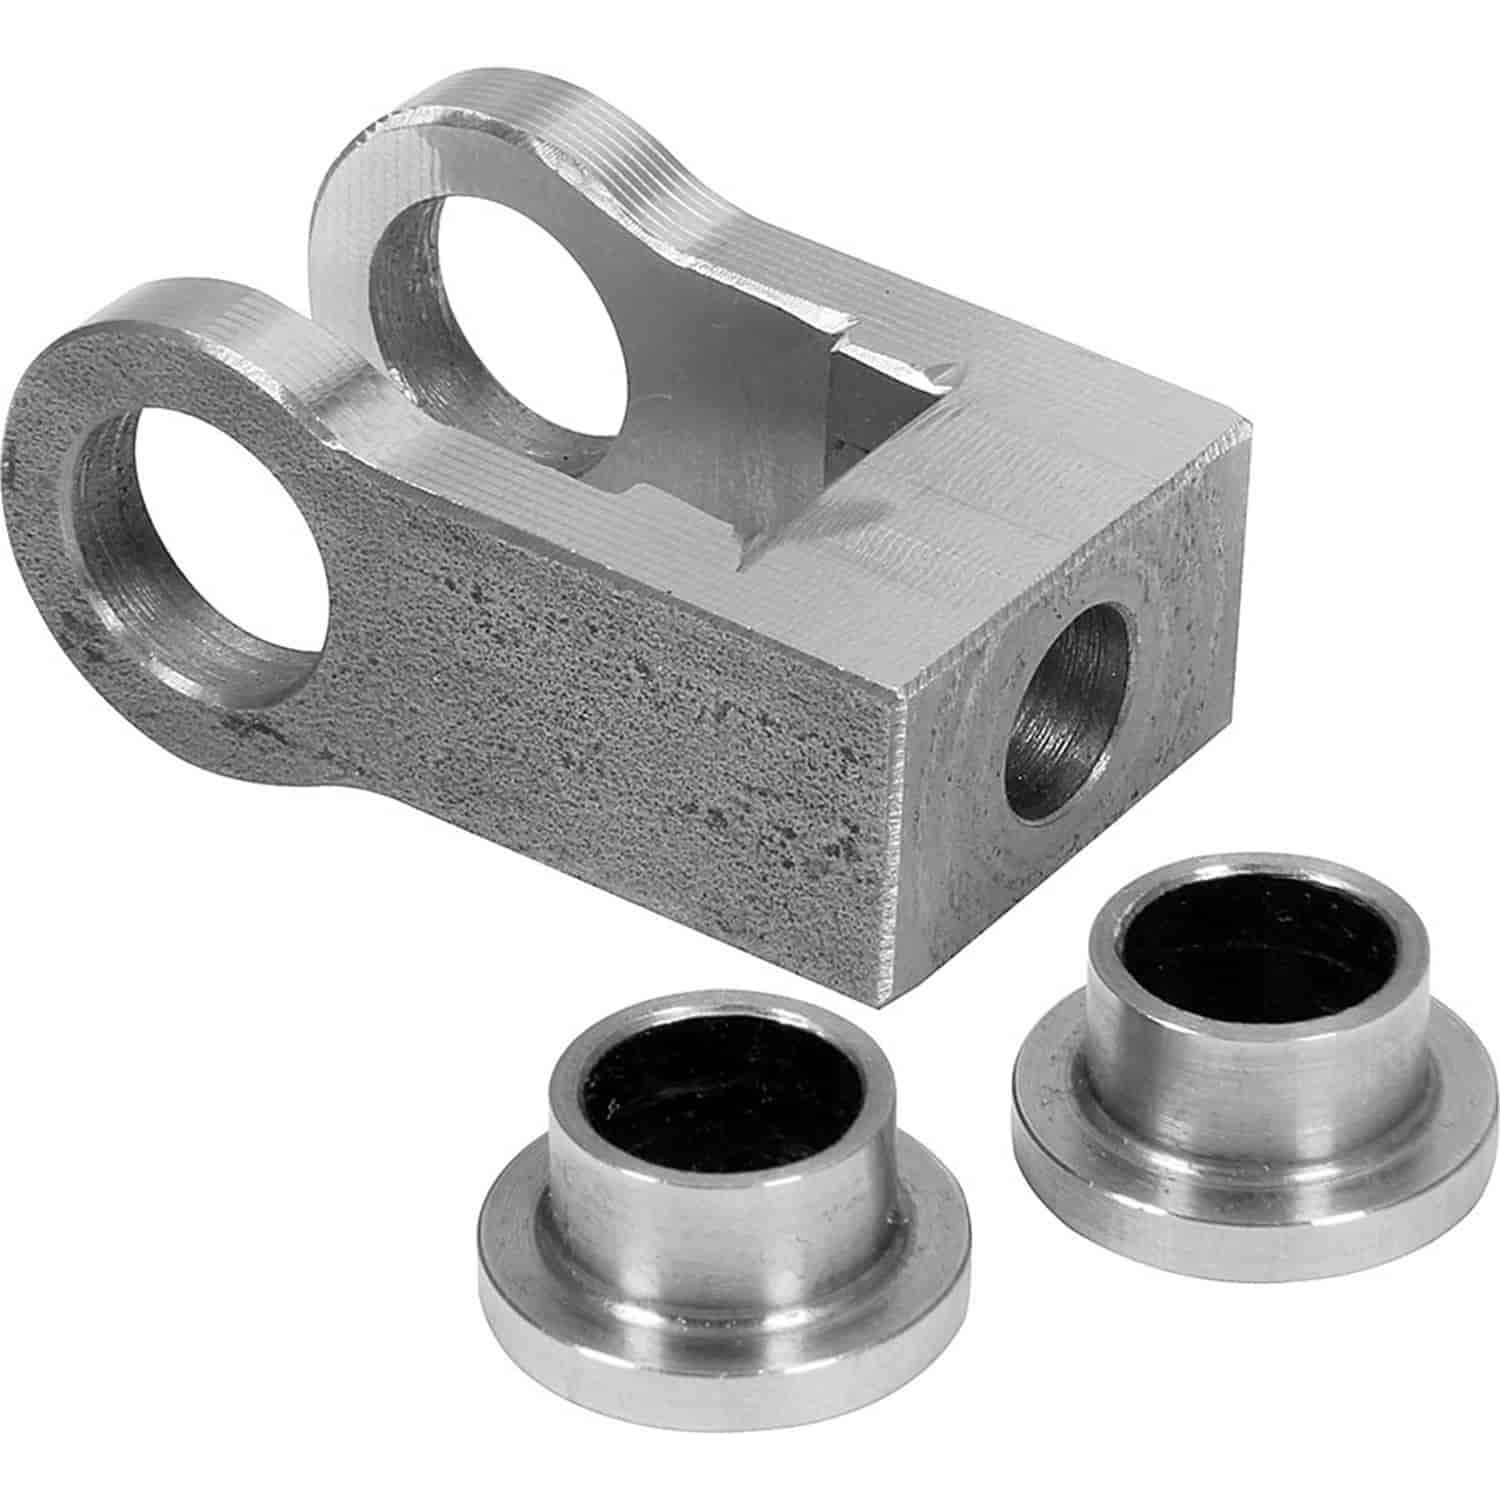 Replacement Shock Swivel Clevis Includes Spacers